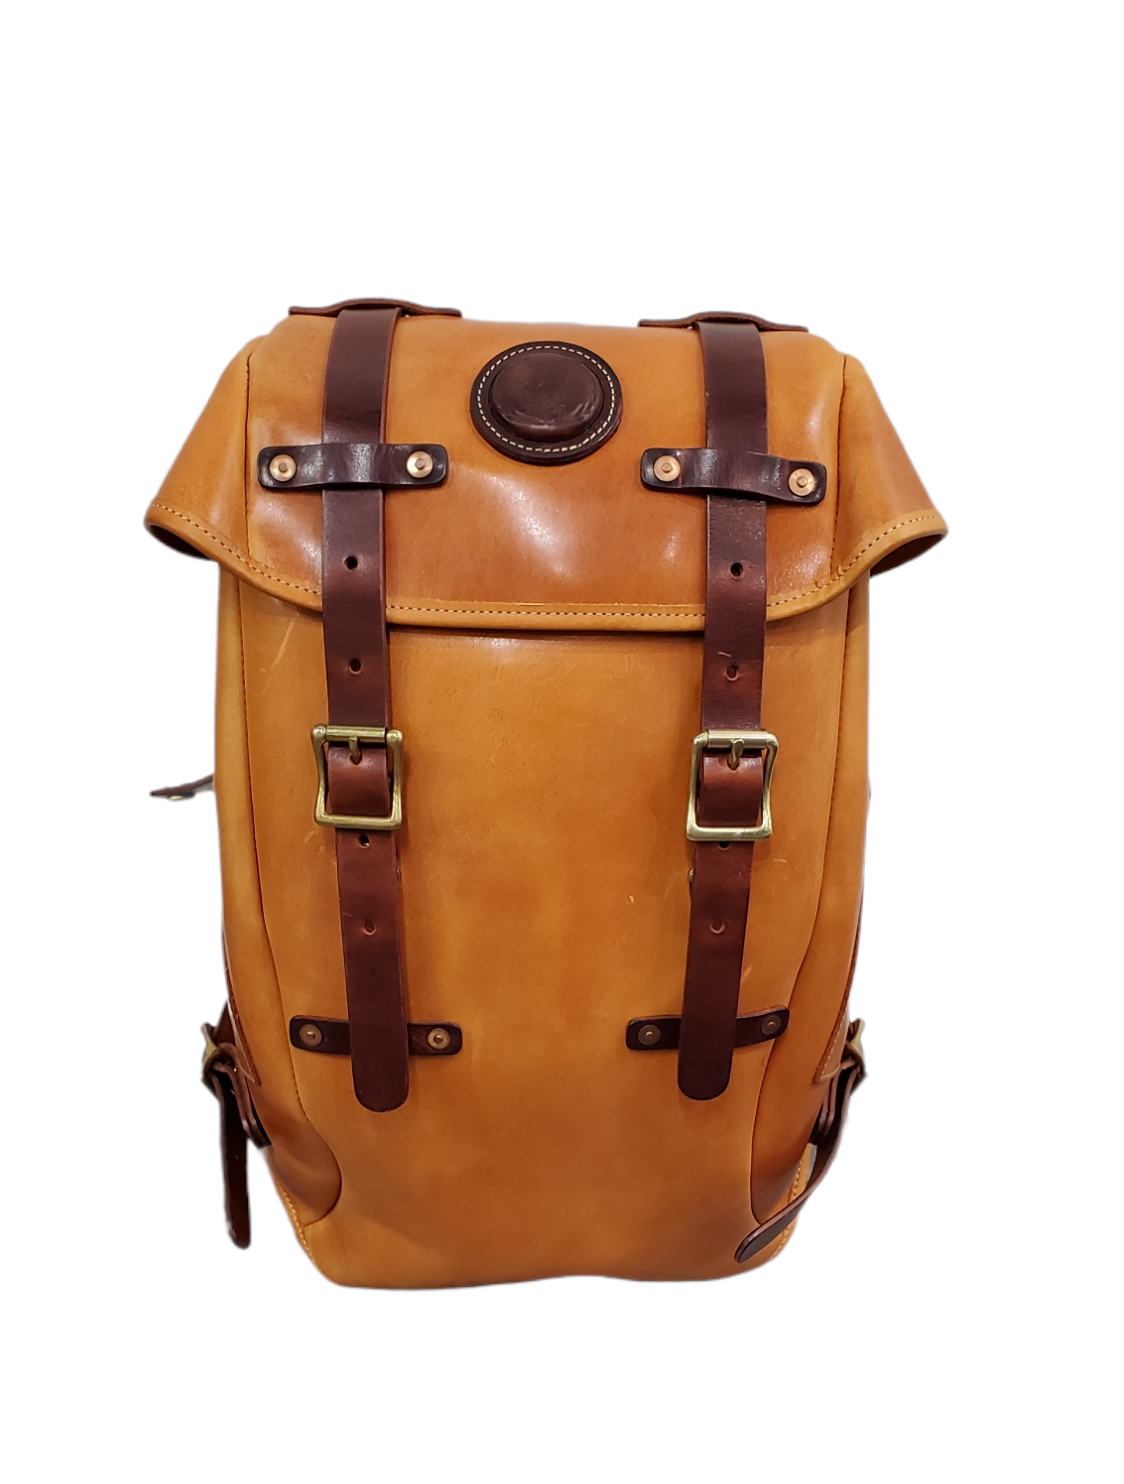 A leather backpack designed by The House Of Rose